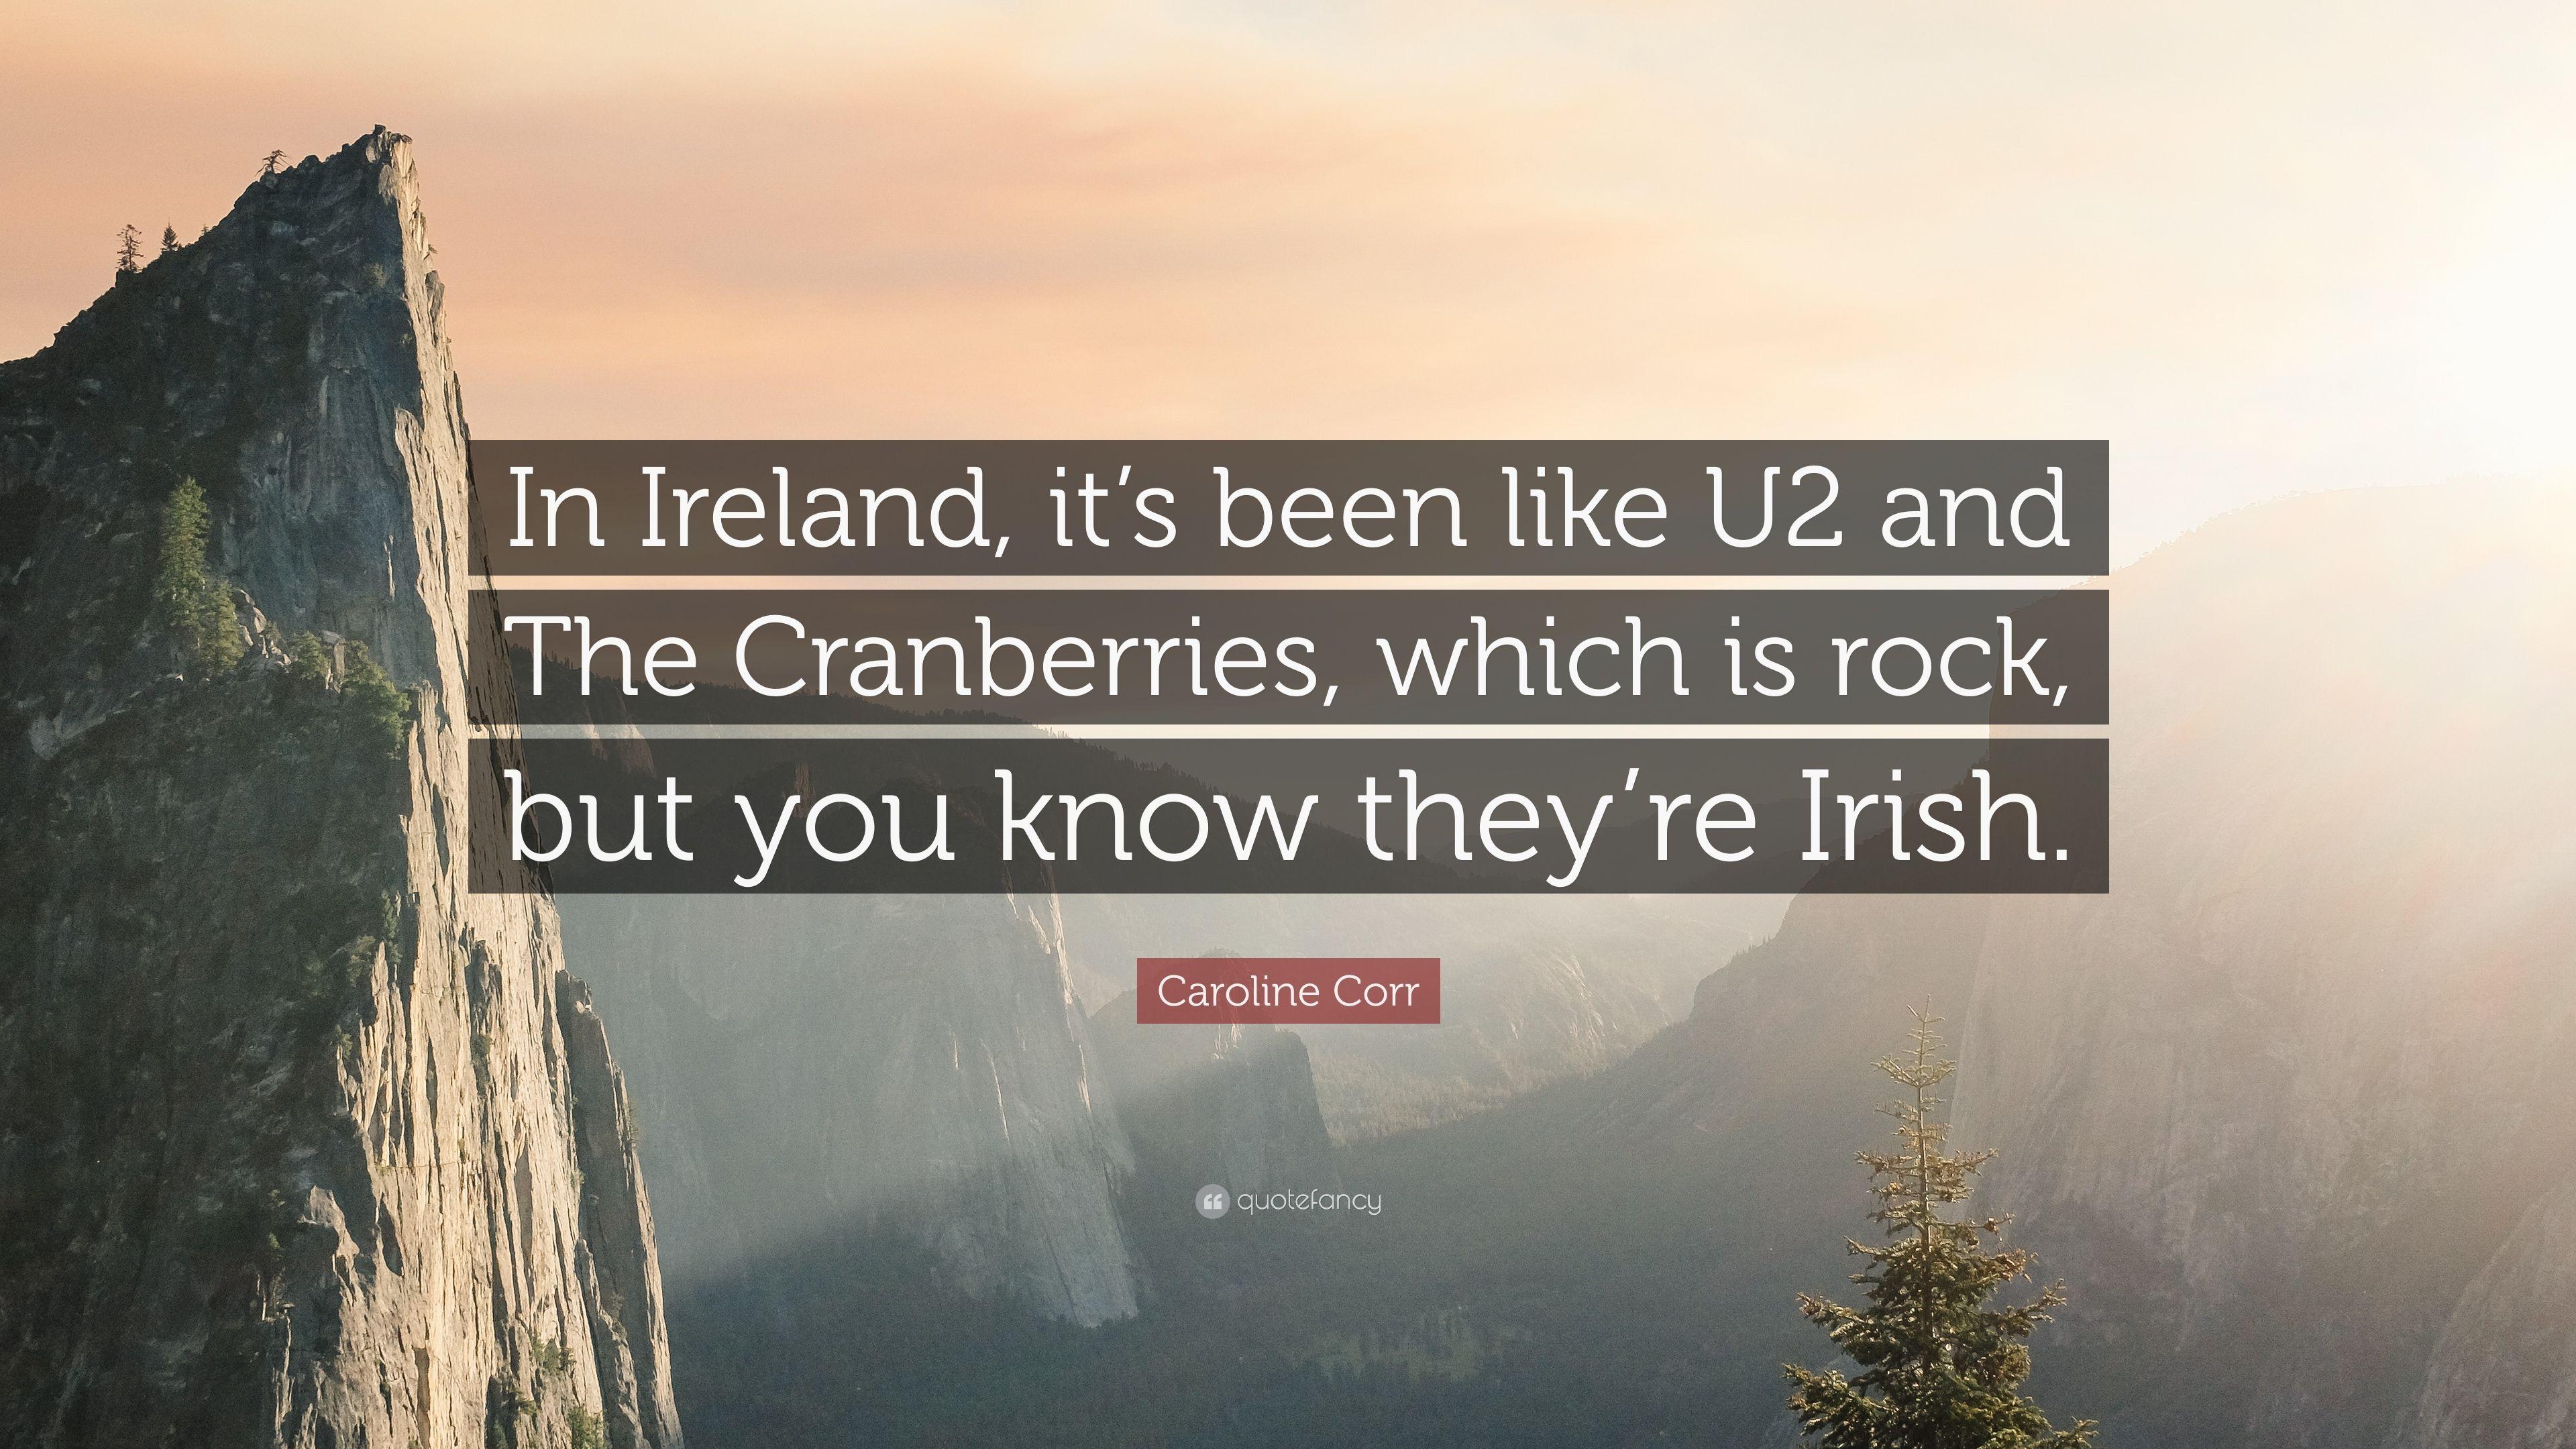 Caroline Corr Quote: “In Ireland, it's been like U2 and